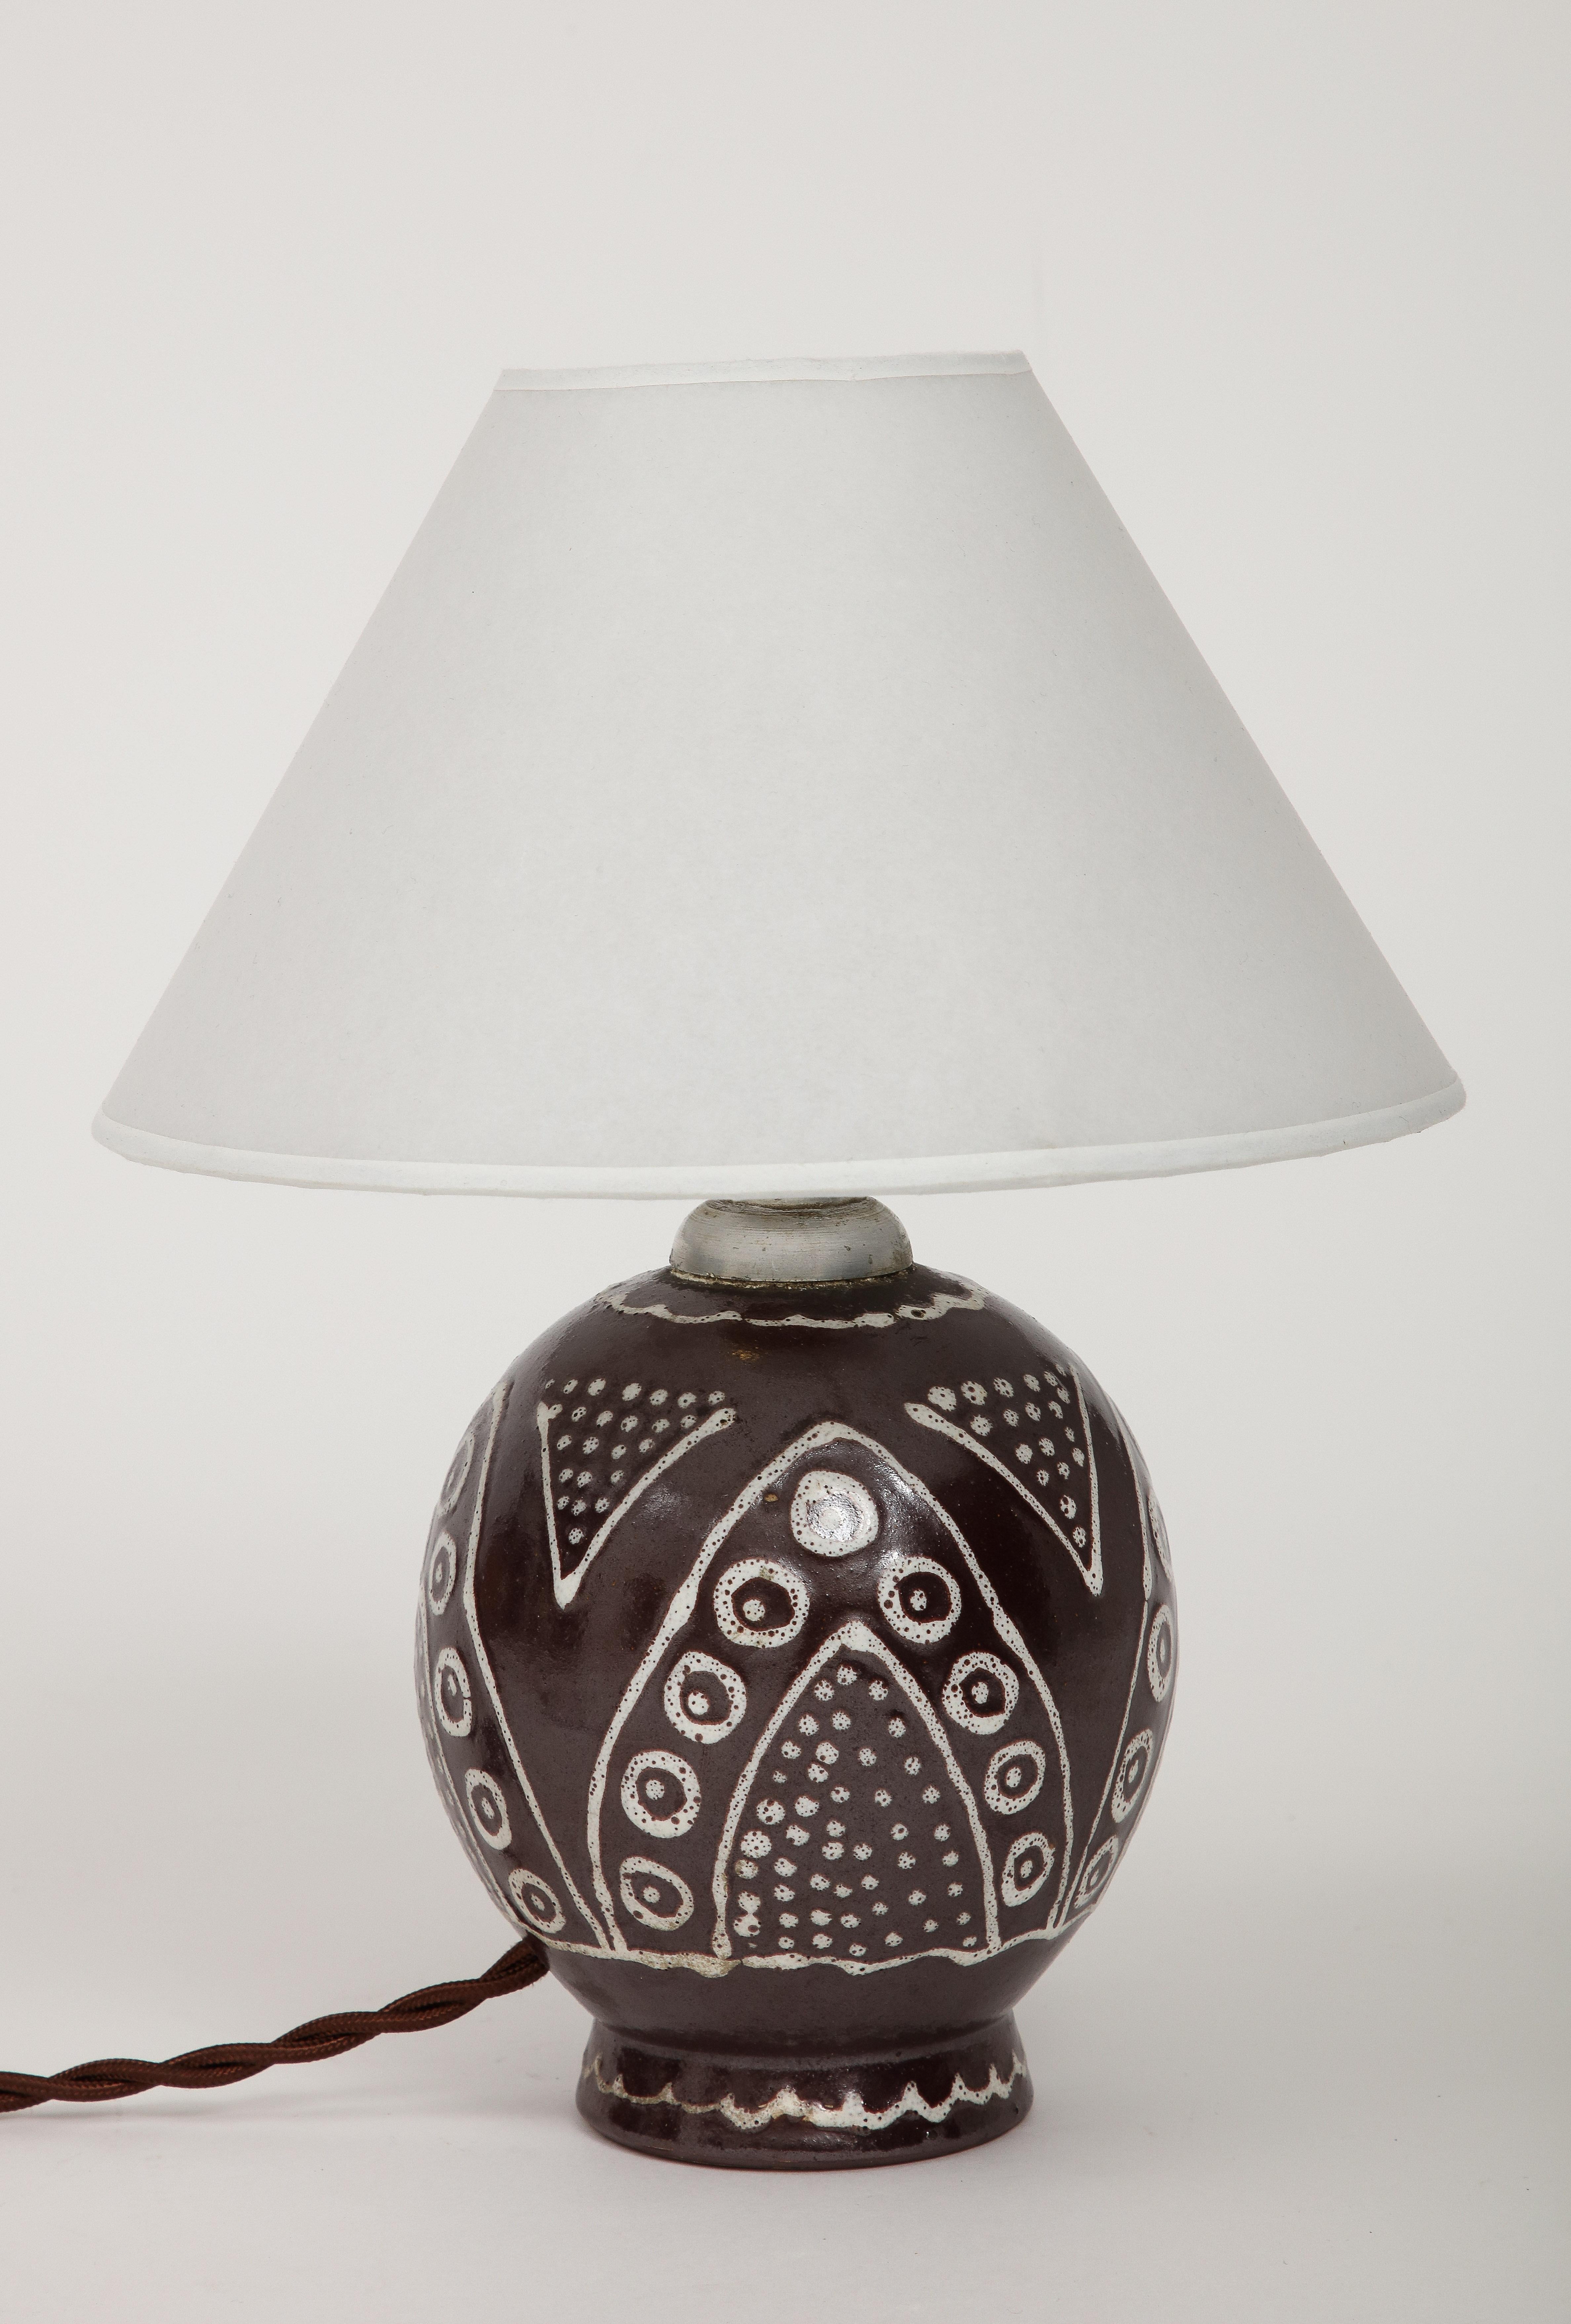 Early 20th Century French Brown Ceramic Lamp, White Glazed Design, C. 1930, Numbered & Inscribed